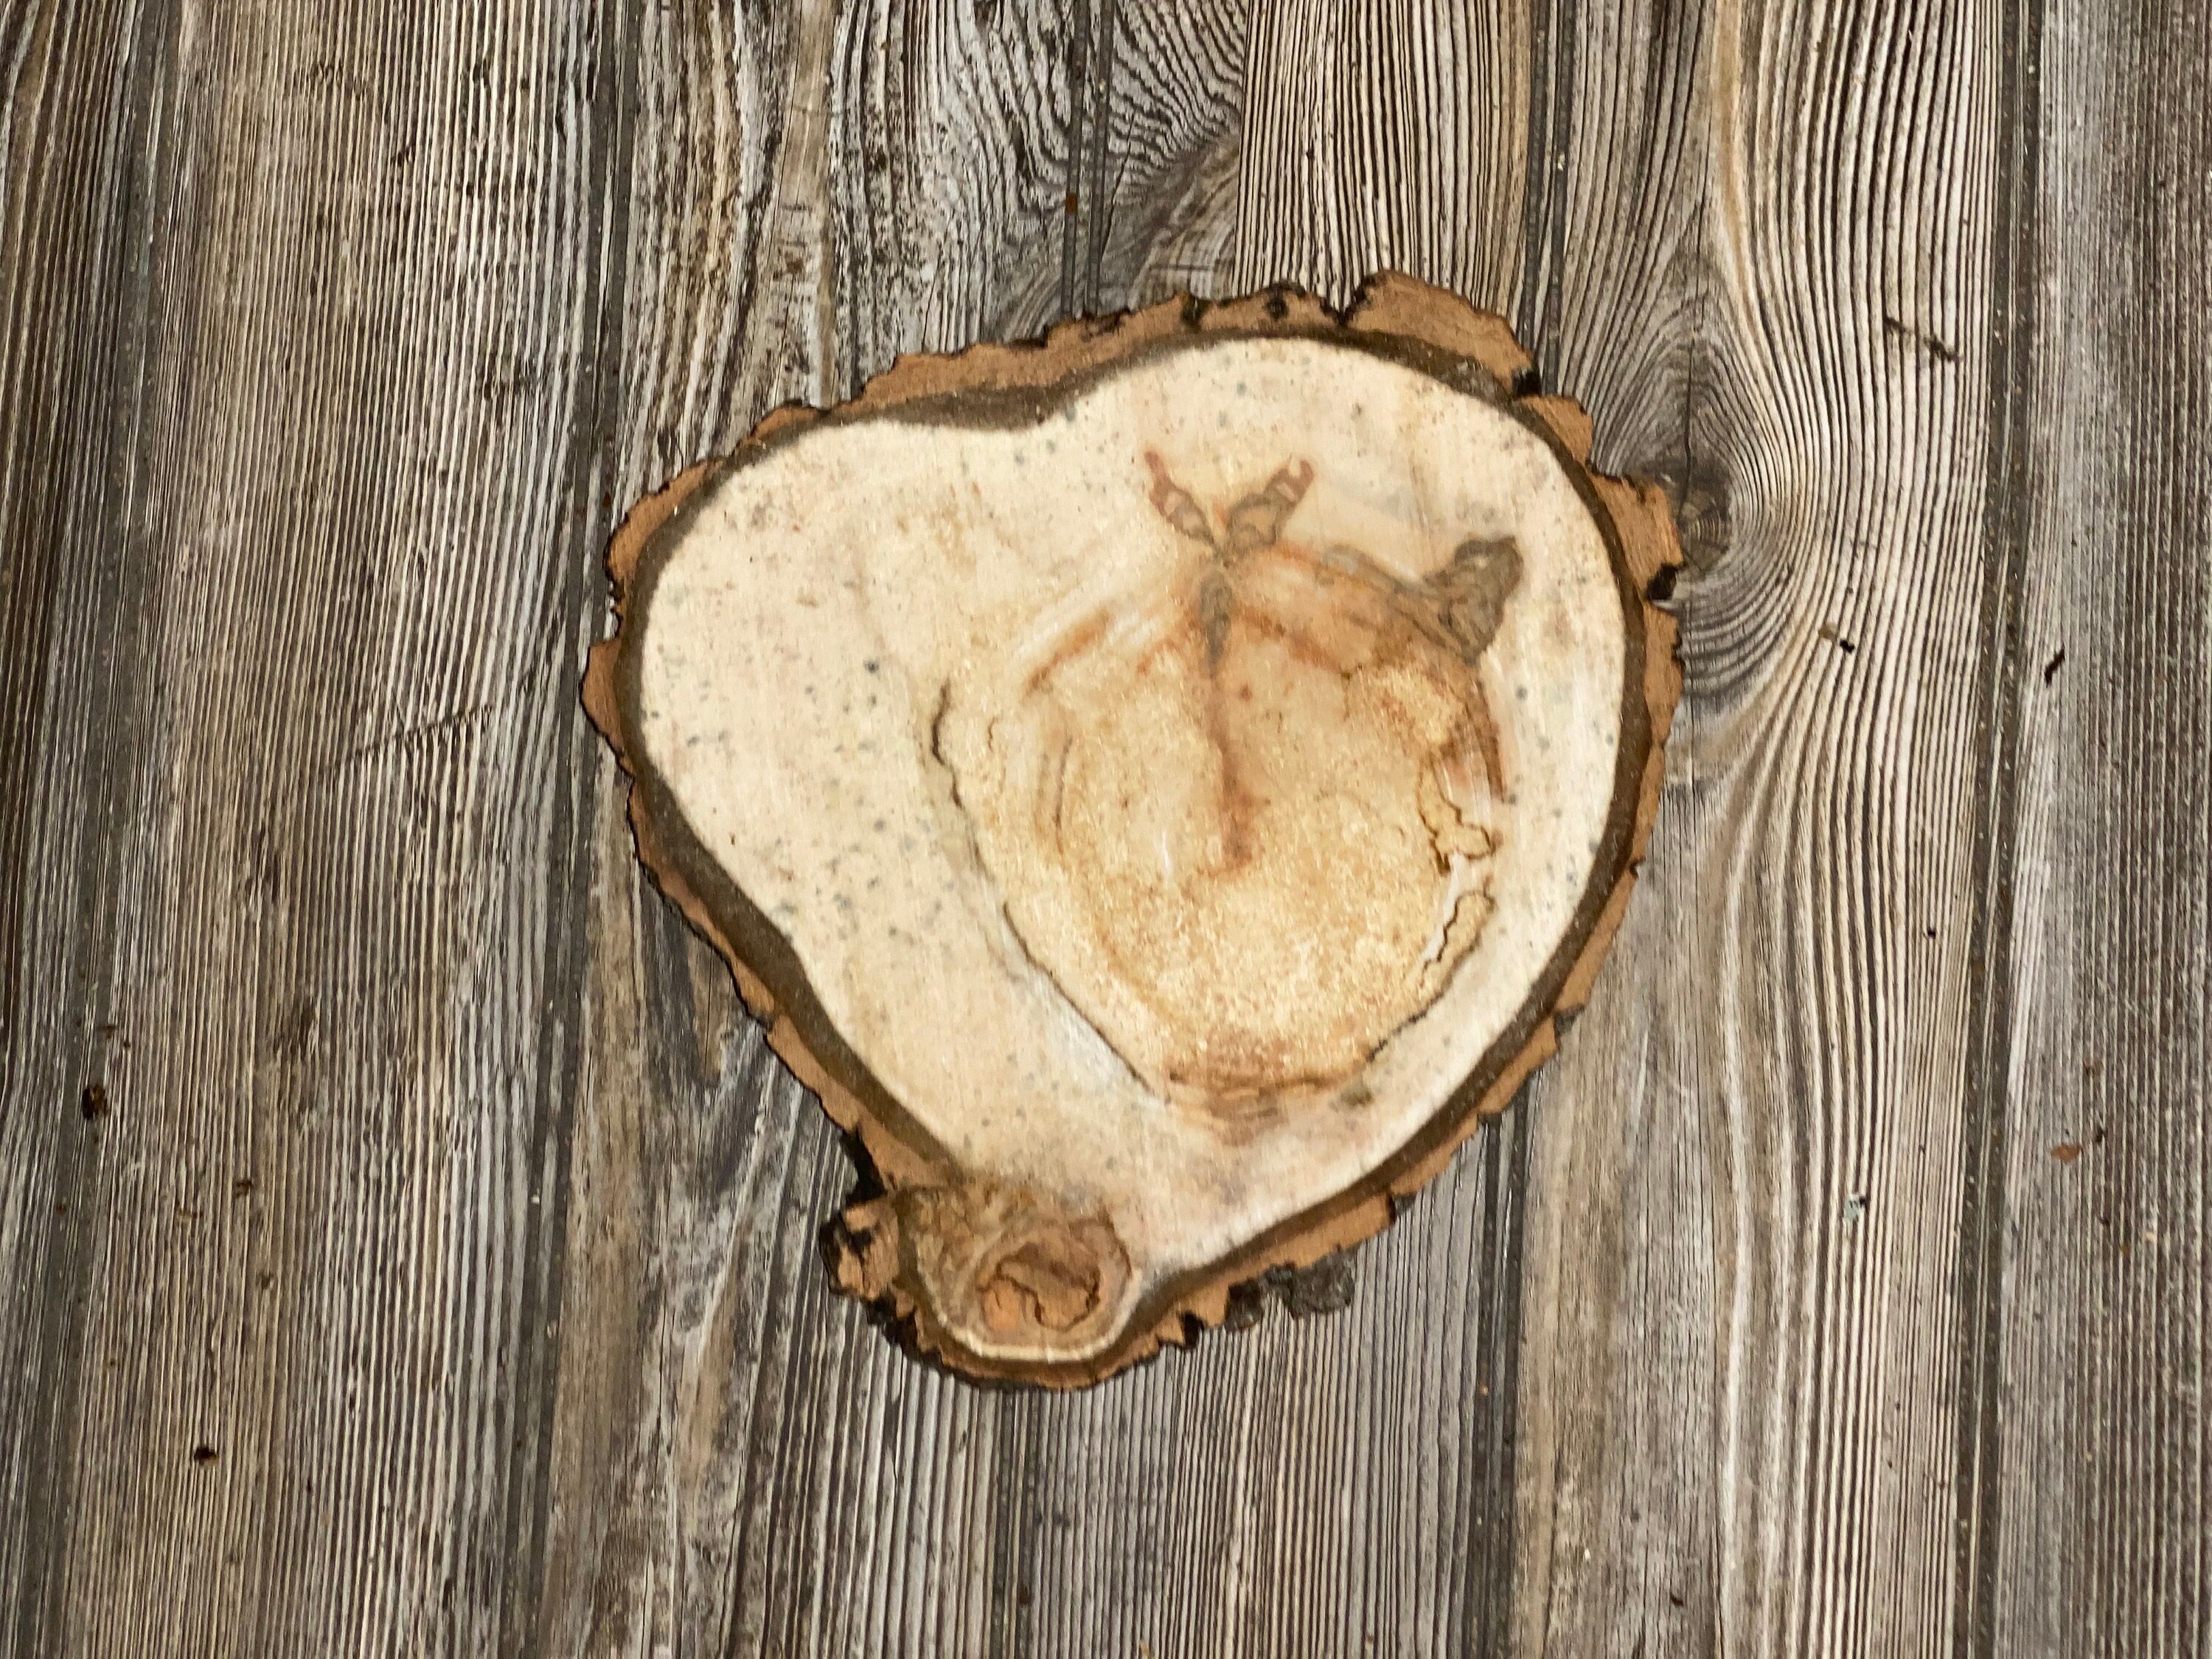 Heart Shaped Aspen Burl Slice, Approximately 10 Inches Long by 9 Inches Wide and 3/4 Inches Thick